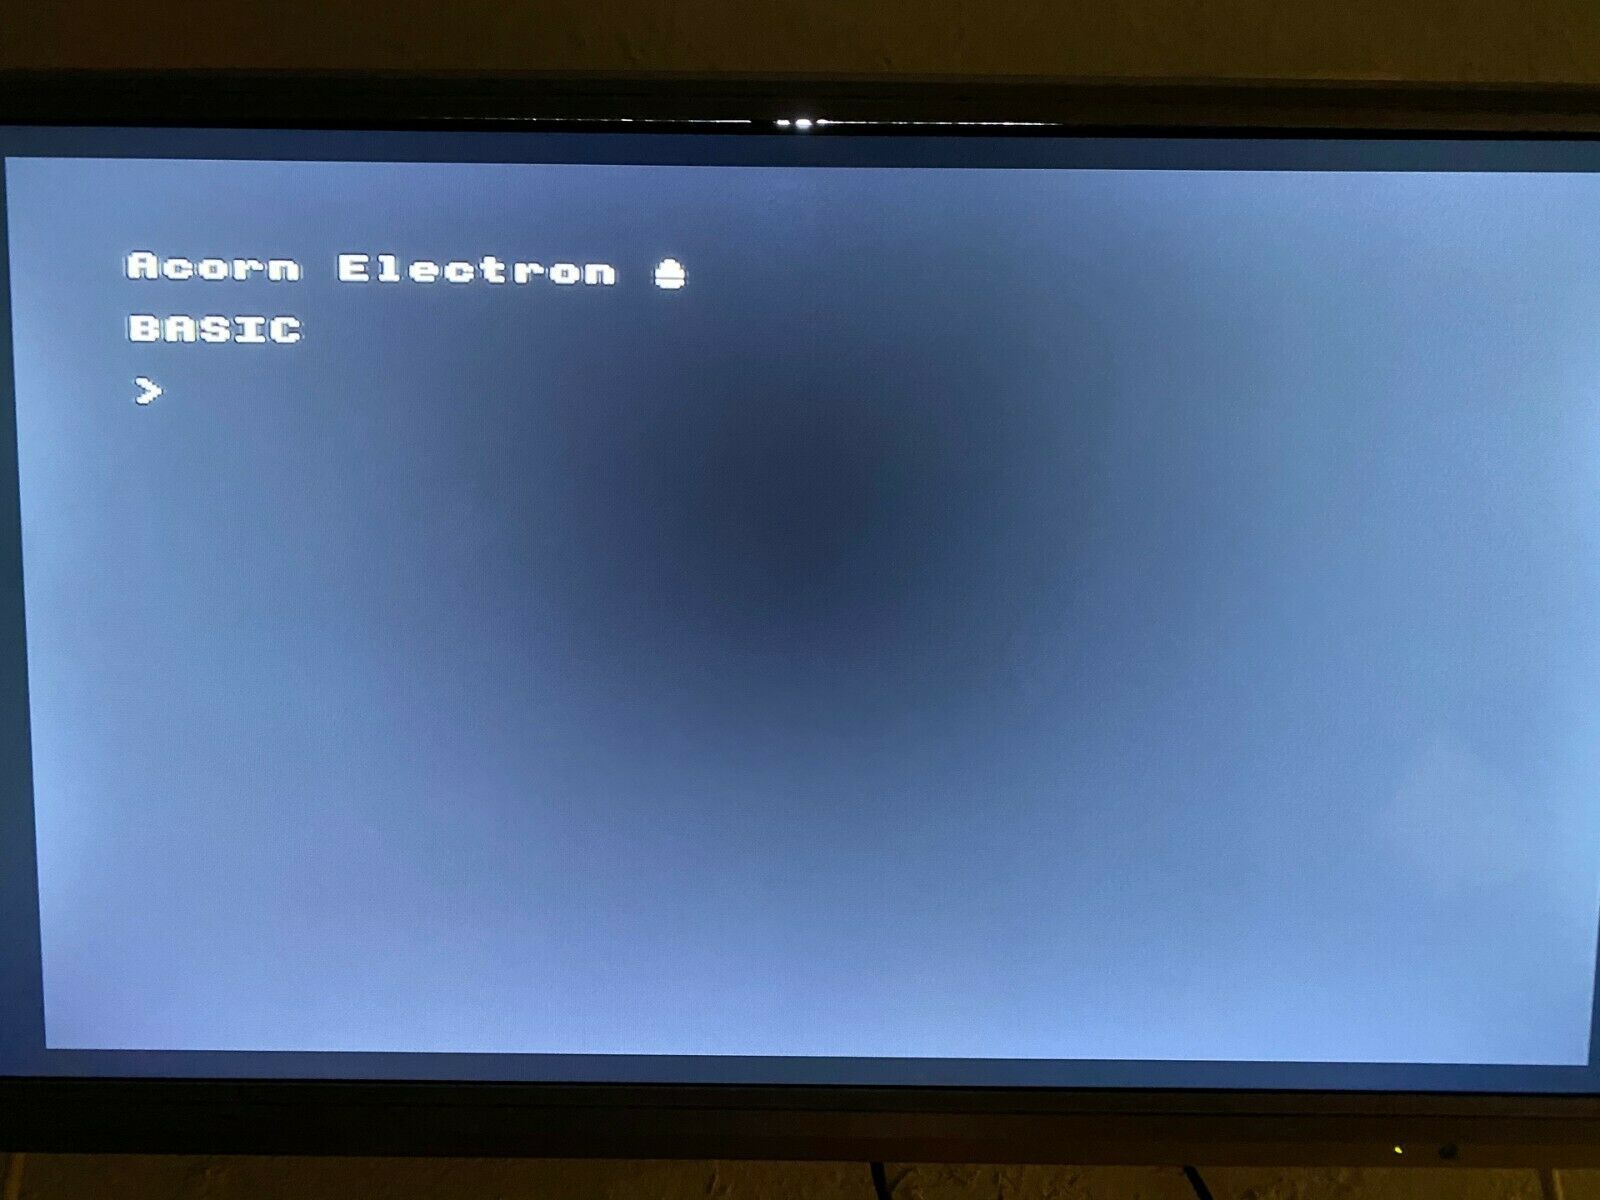 Acorn electron emulator for raspberry pi with games